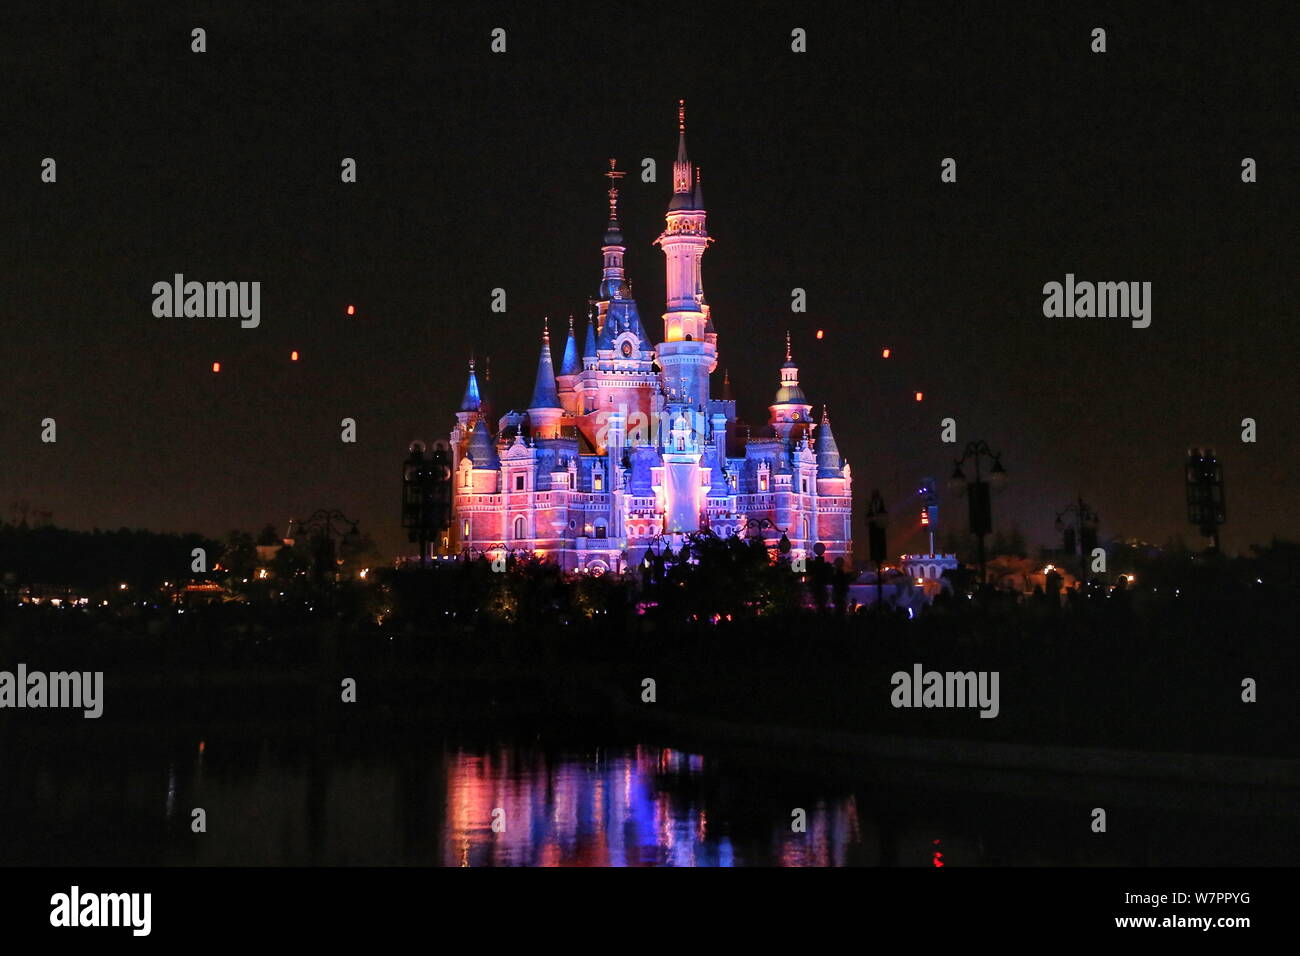 The Disney Castle is illuminated in the Shanghai Disneyland during the first anniversary celebration ceremony at the Shanghai Disney Resort in Pudong, Stock Photo